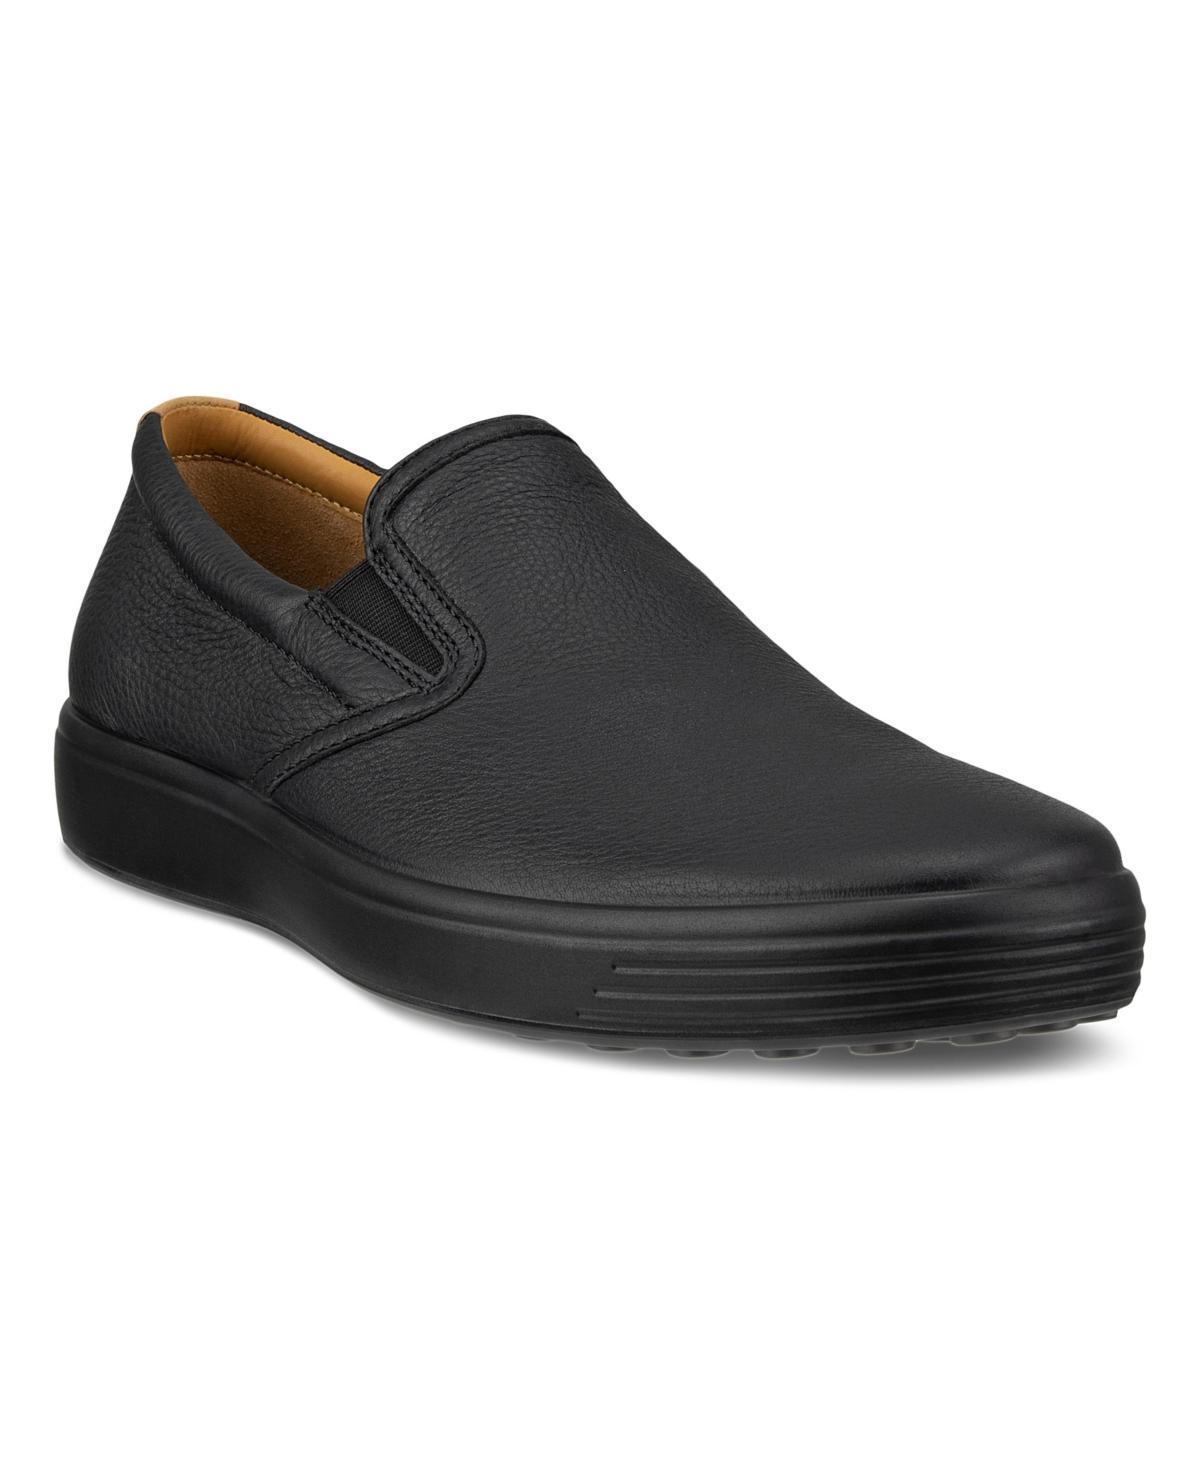 ECCO Soft 7 2.0 Water Resistant Slip-On Sneaker Product Image